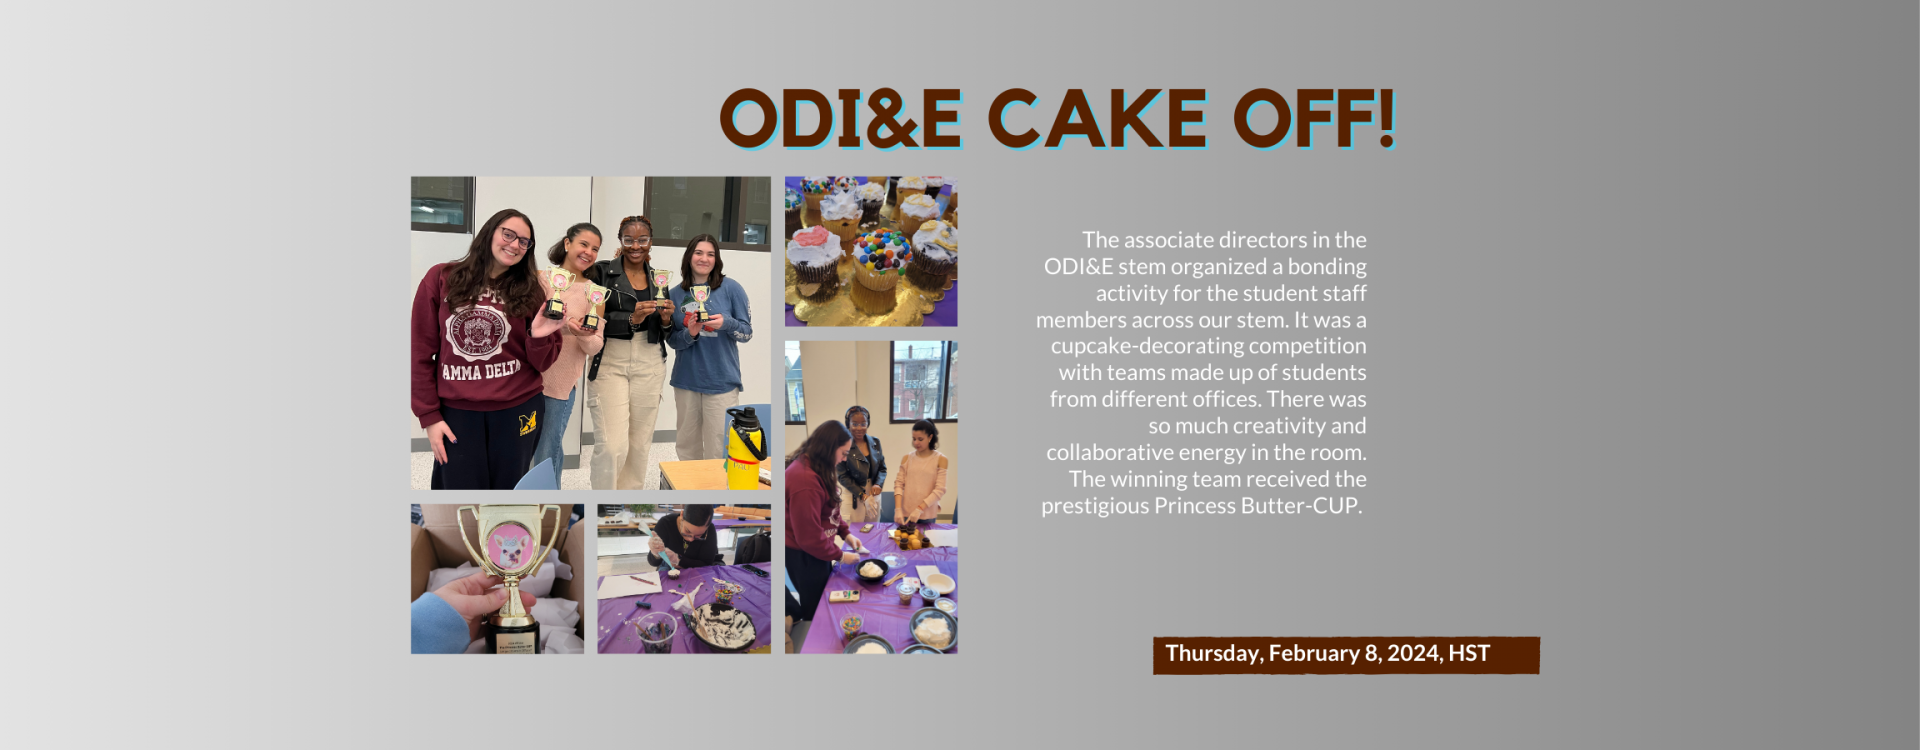 ODI&E Cake off!: The associate directors in the ODI&E stem organized a bonding activity for the student staff members across our stem. It was a cupcake-decorating competition with teams made up of students from different offices. There was so much creativity and collaborative energy in the room. The winning team received the prestigious Princess Butter-CUP. 